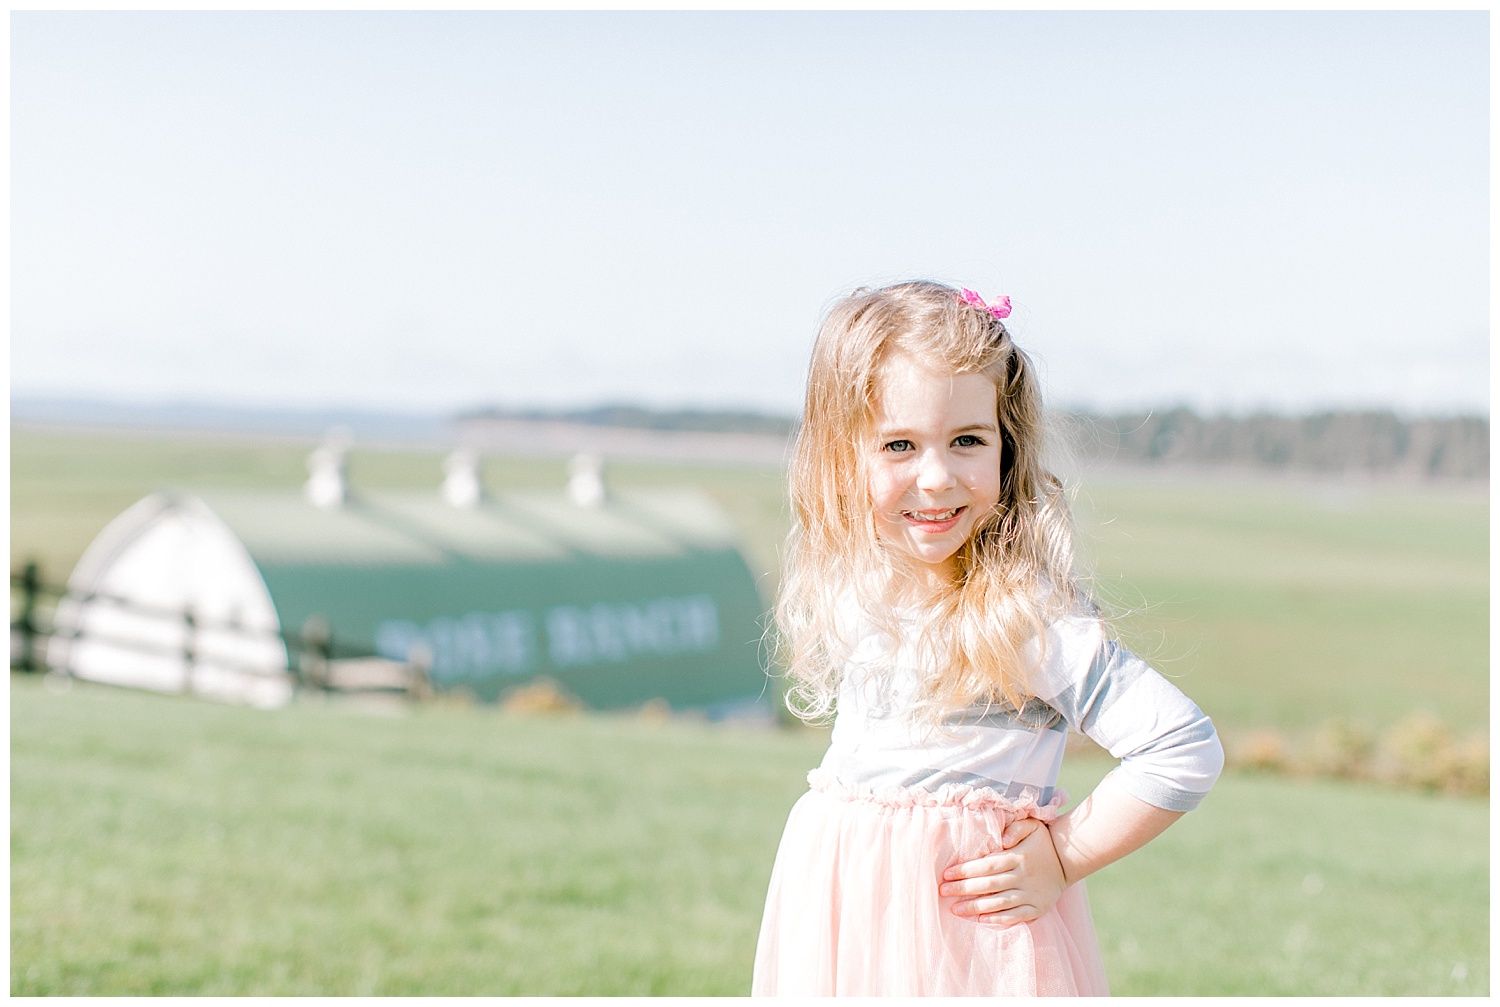 Emma Rose Company Seattle and Portland Wedding and Portrait Photographer | What to Wear for Family Pictures | Cute Toddler